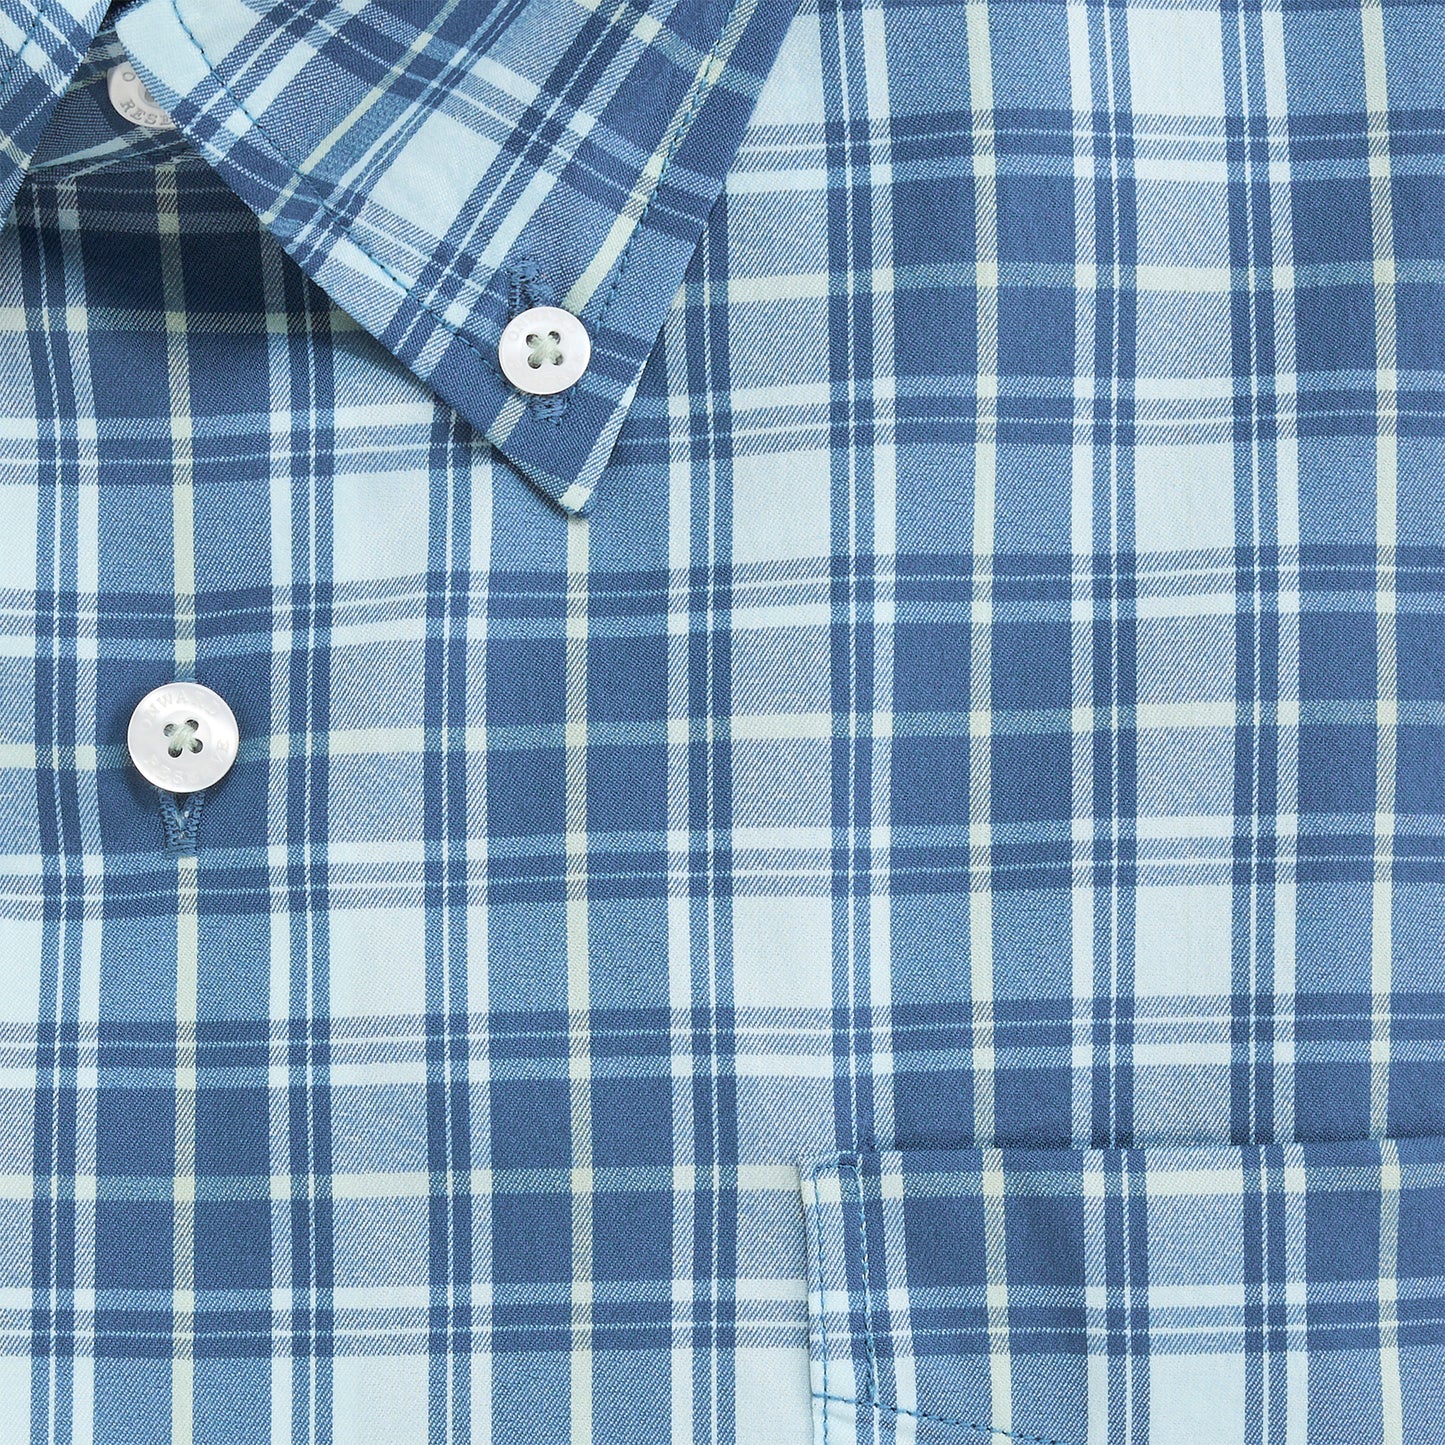 Beacon Classic Fit Performance Button Down